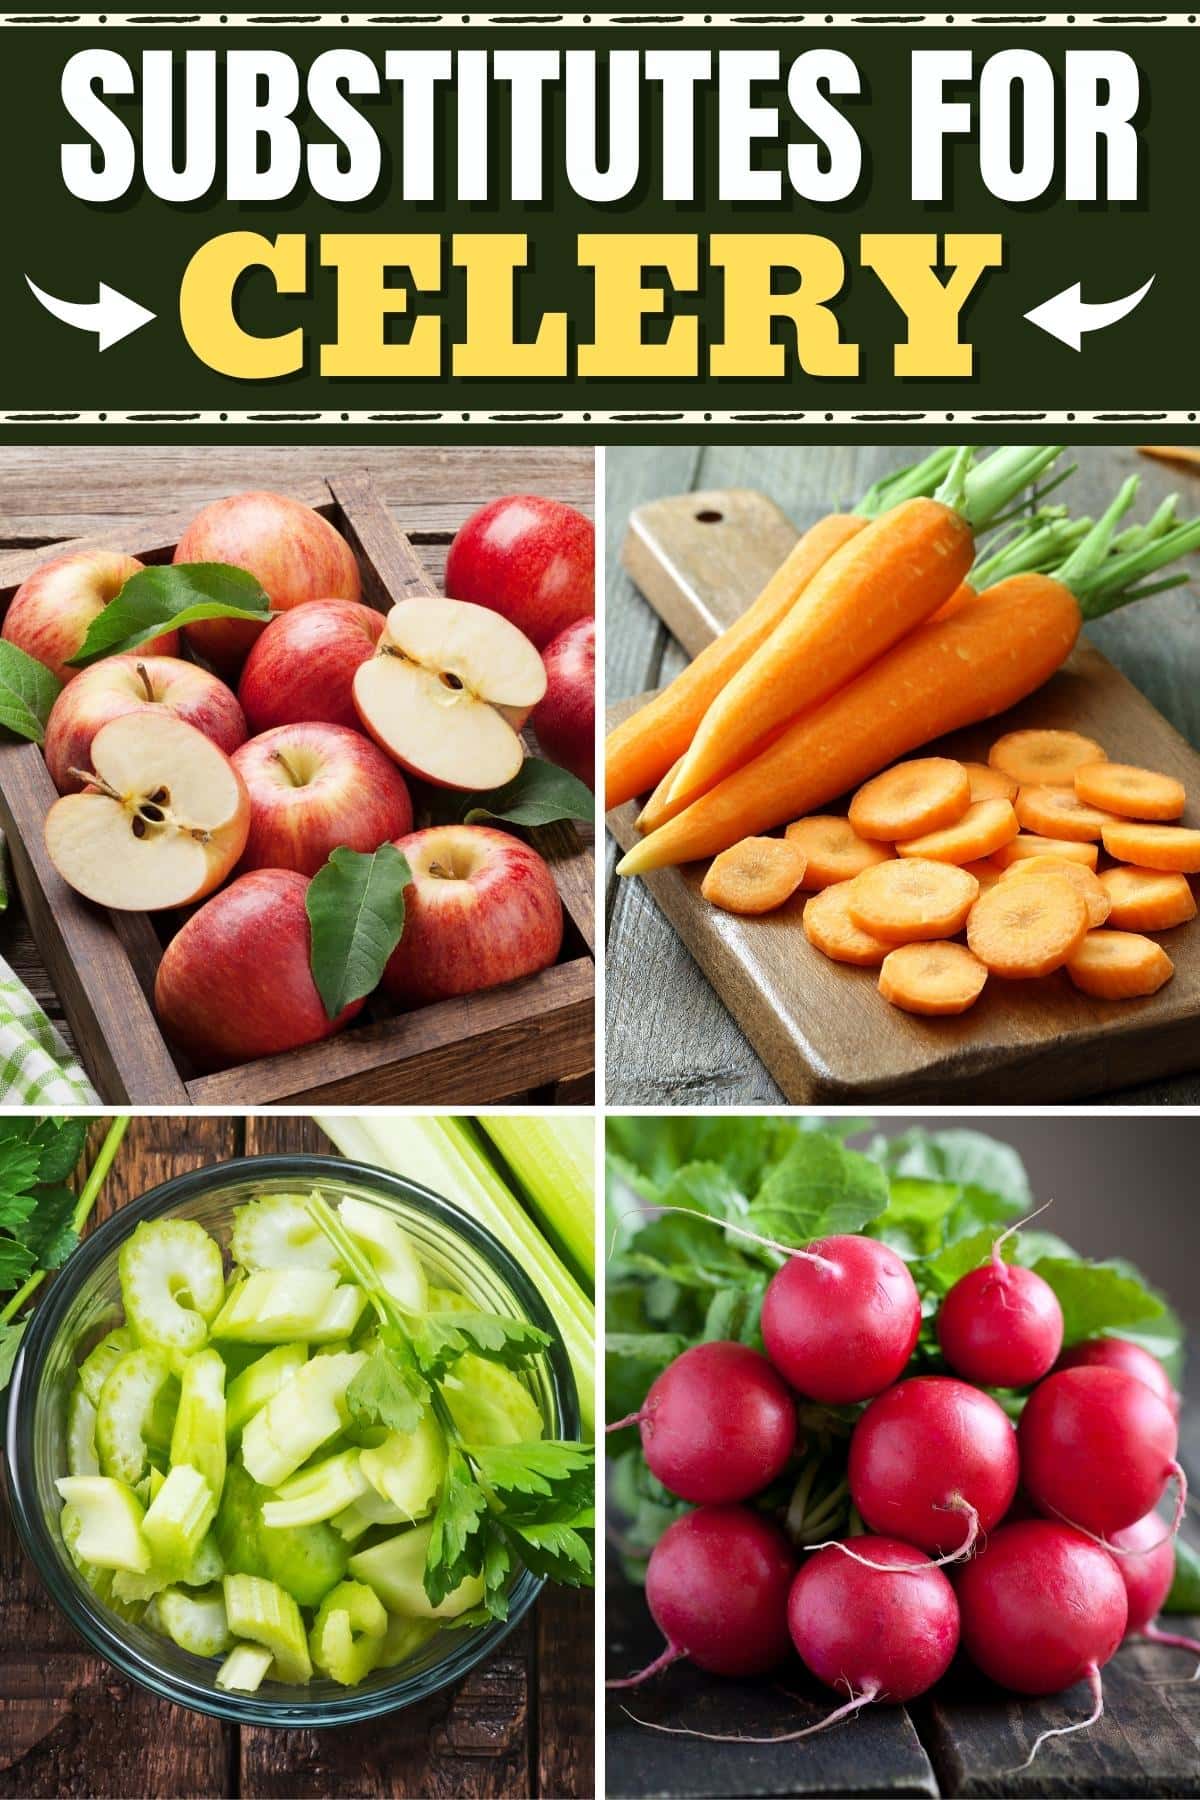 Substitutes for Celery